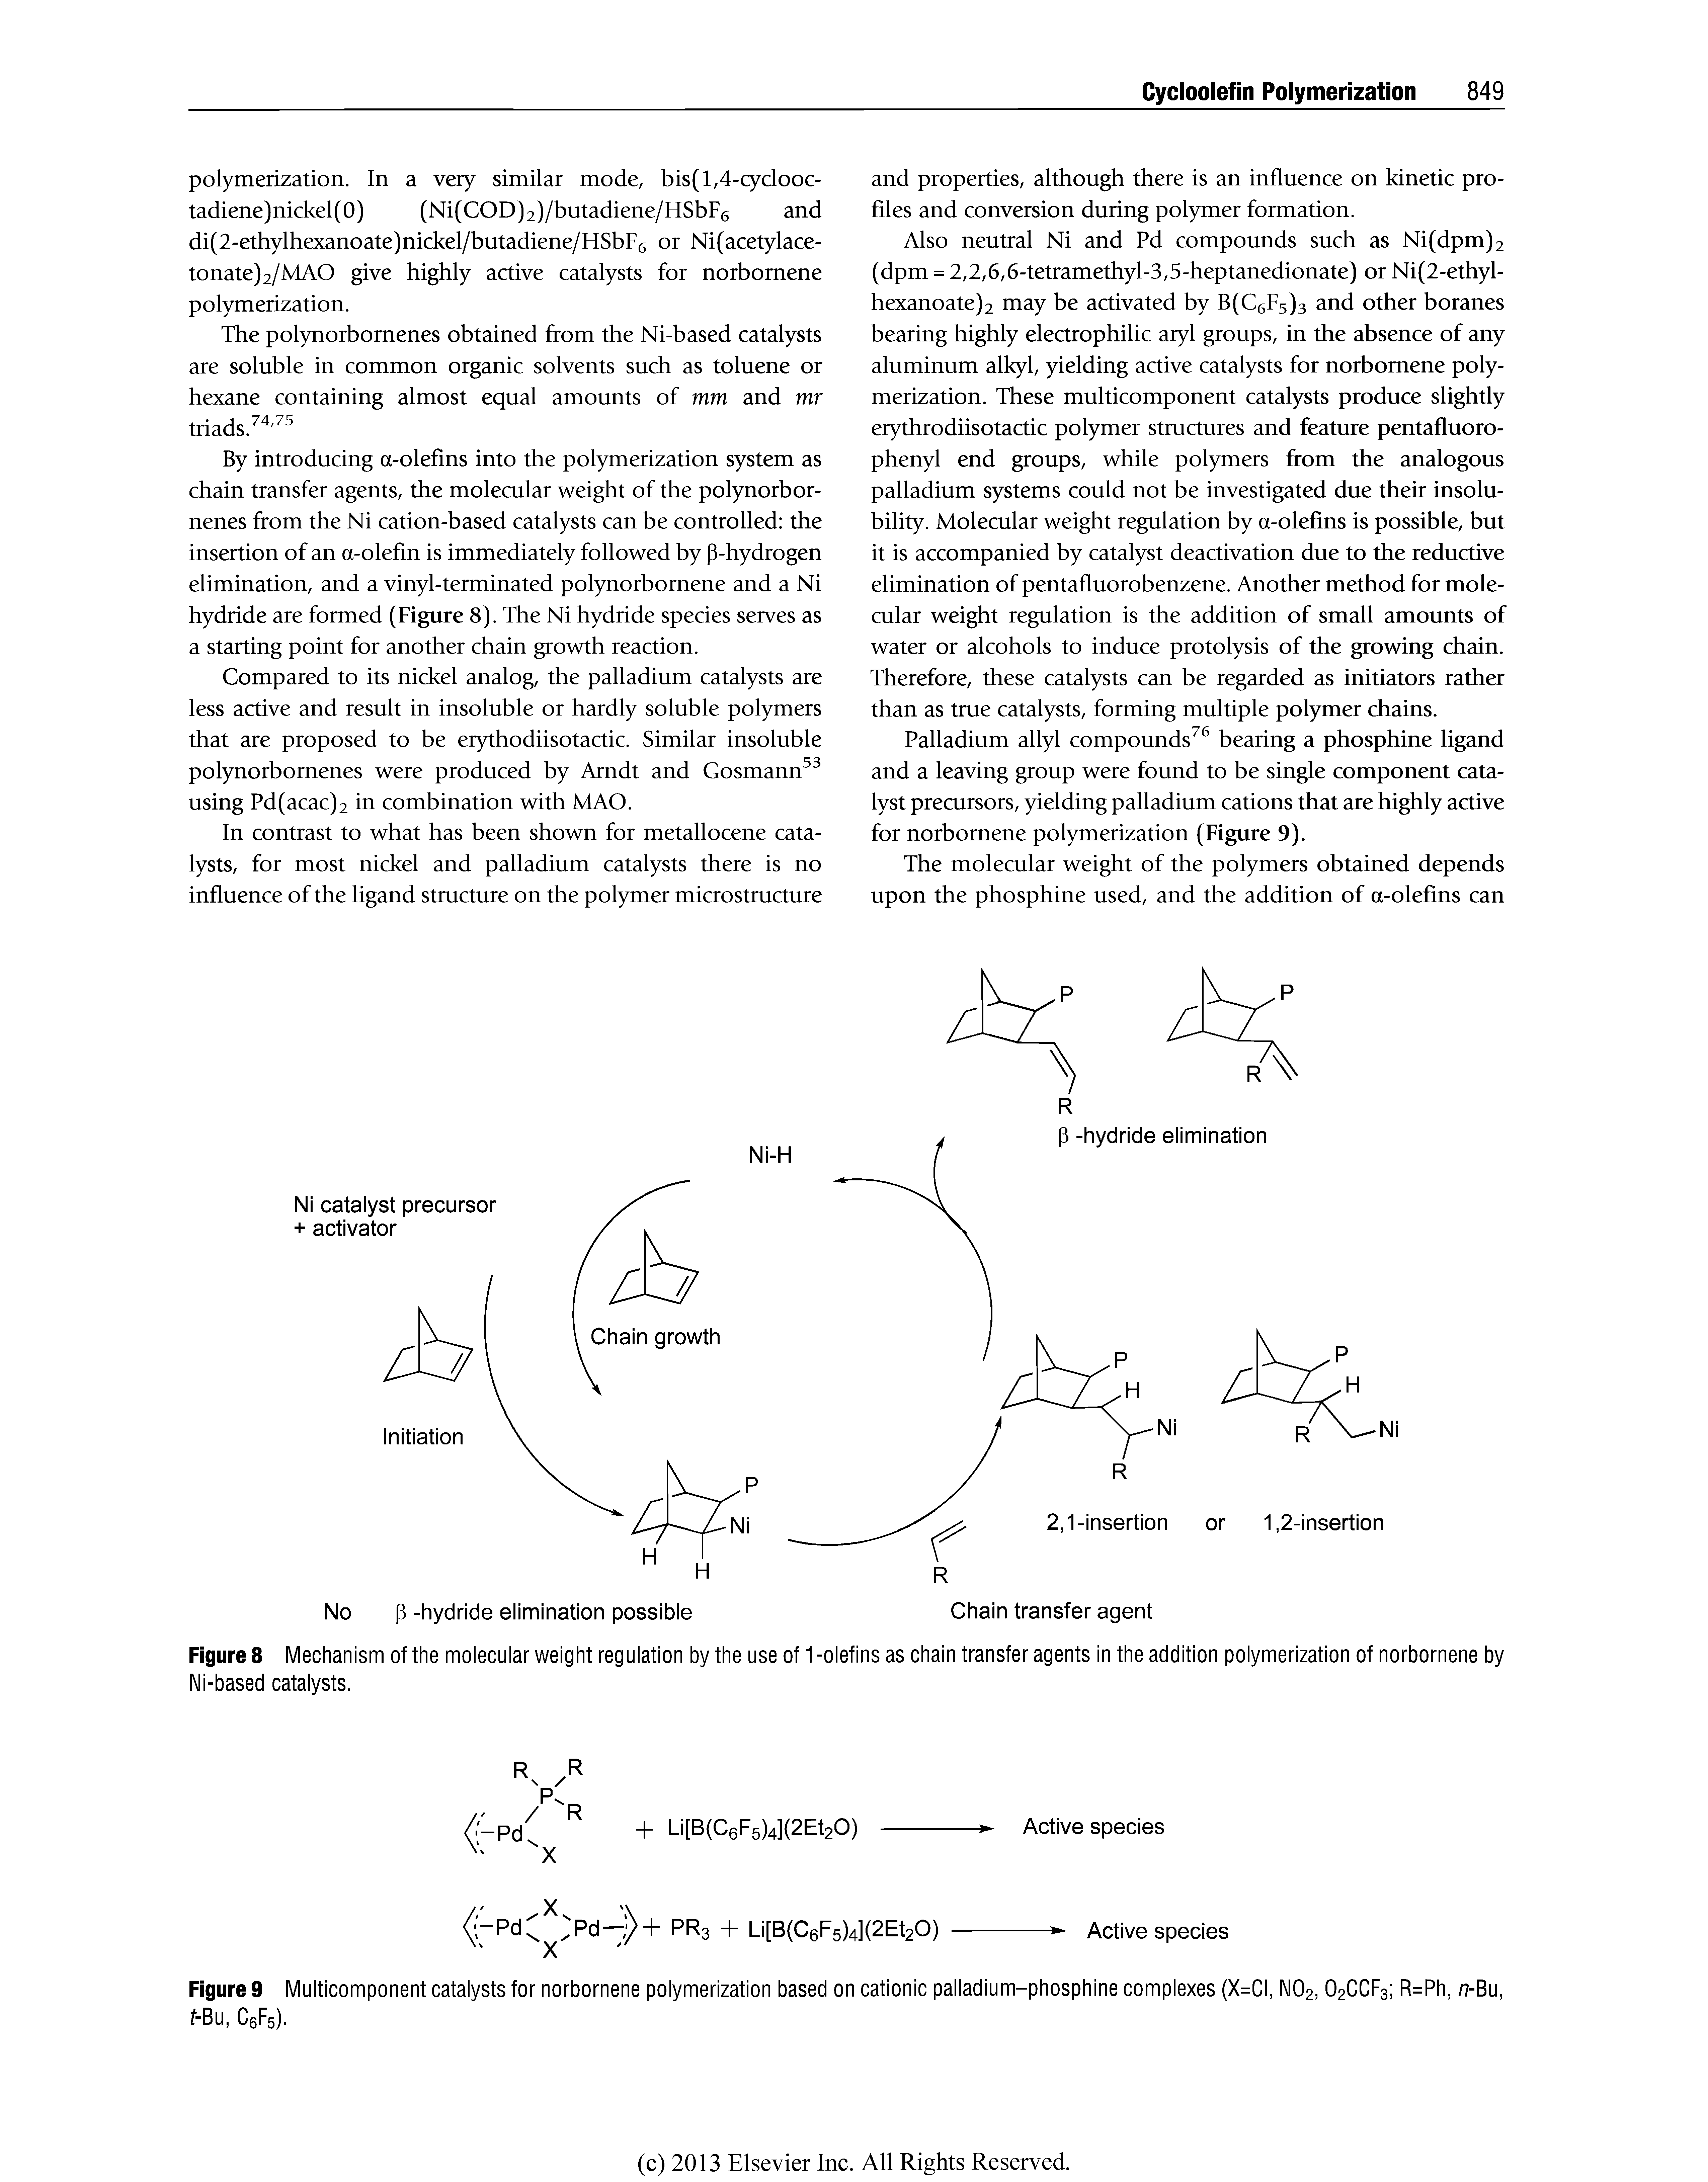 Figure 8 Mechanism of the molecular weight regulation by the use of 1 -olefins as chain transfer agents in the addition polymerization of norbomene by Ni-based catalysts.